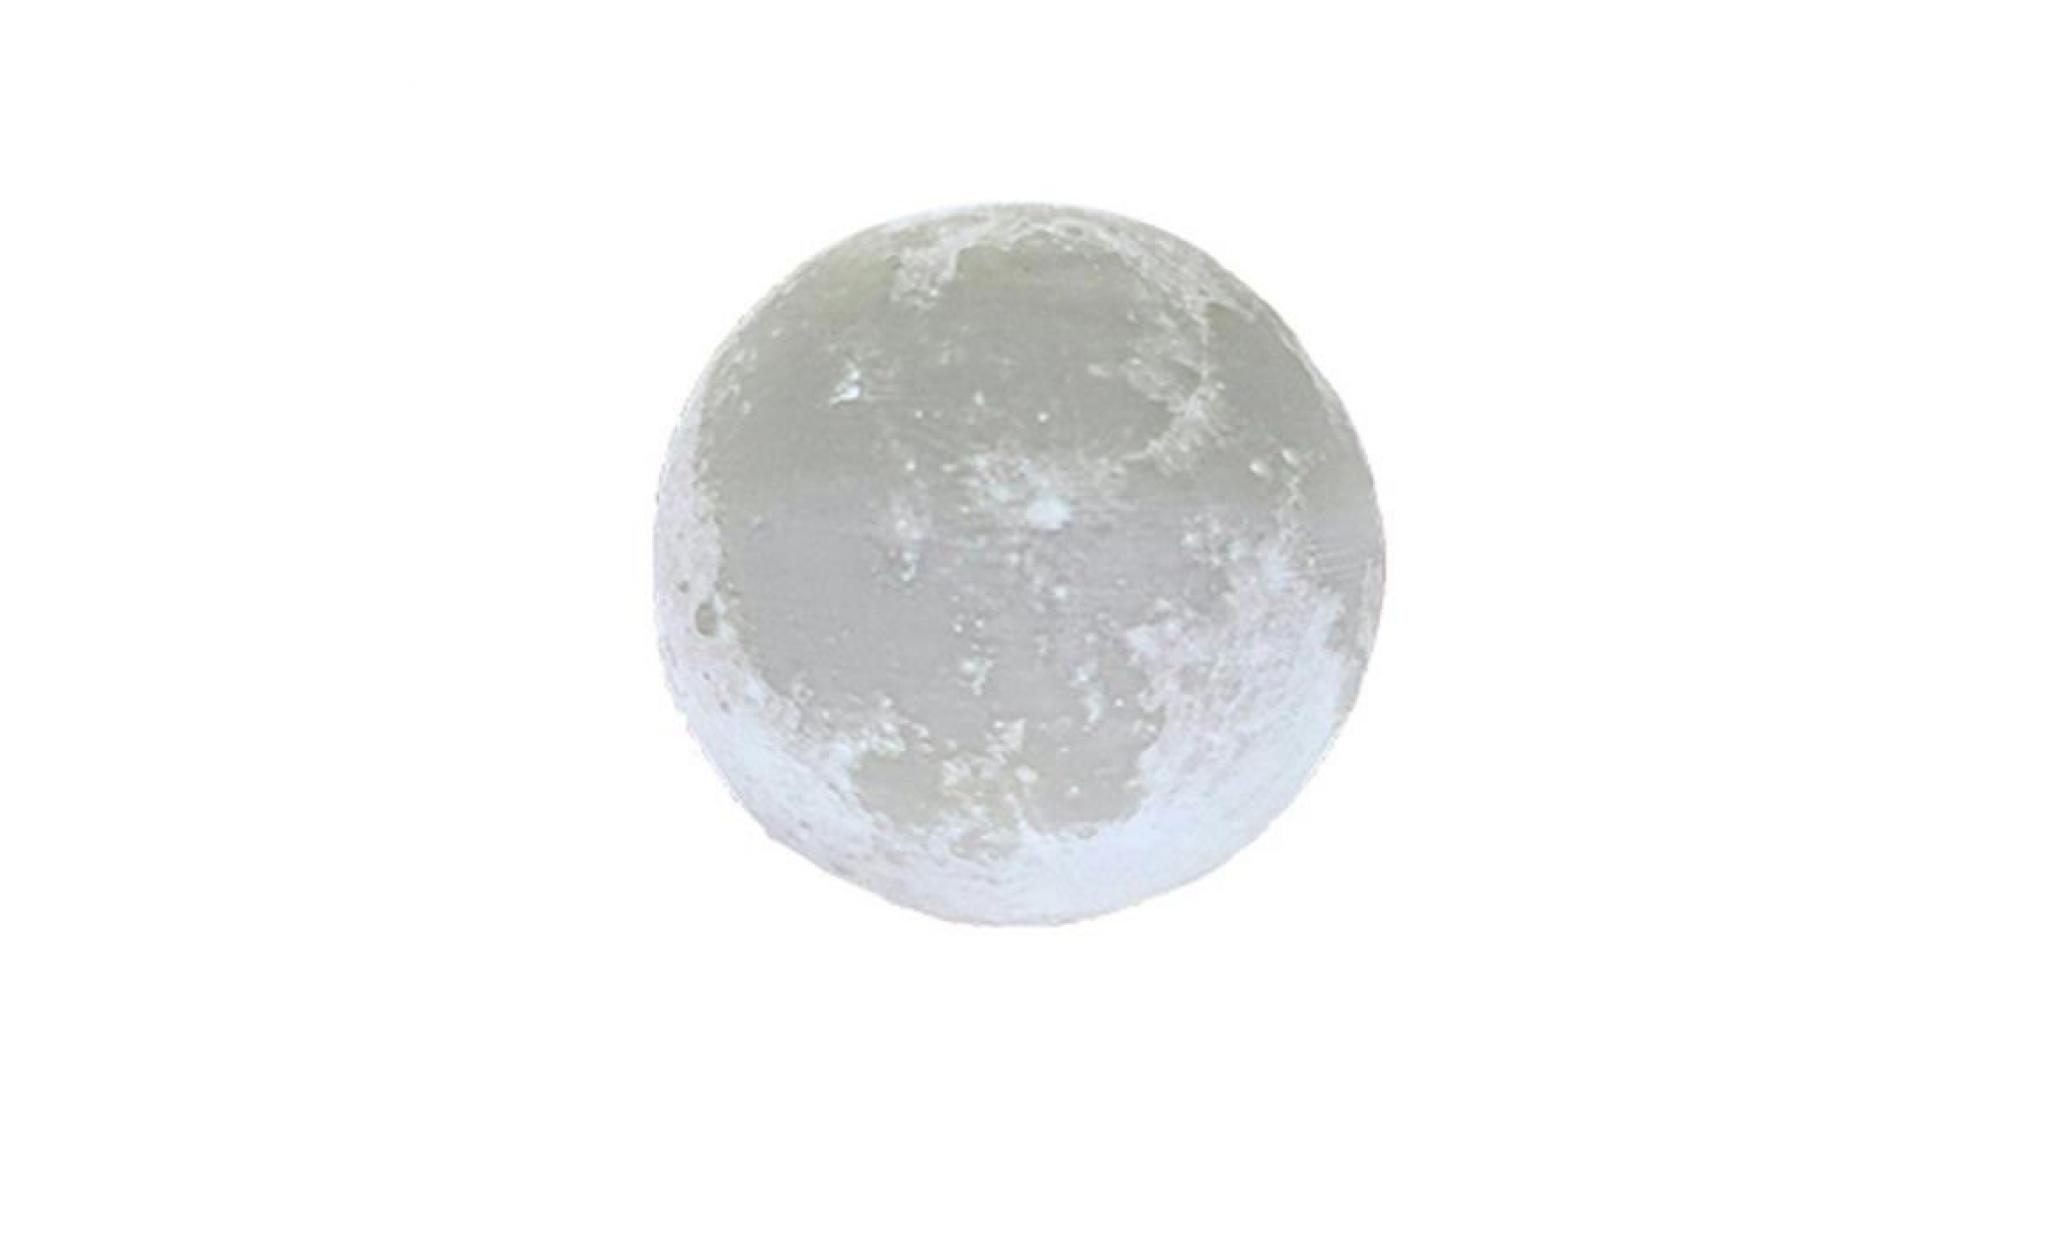 3d usb led magical moon night light moonlight table desk moon lamp gift c paontry1010 pas cher